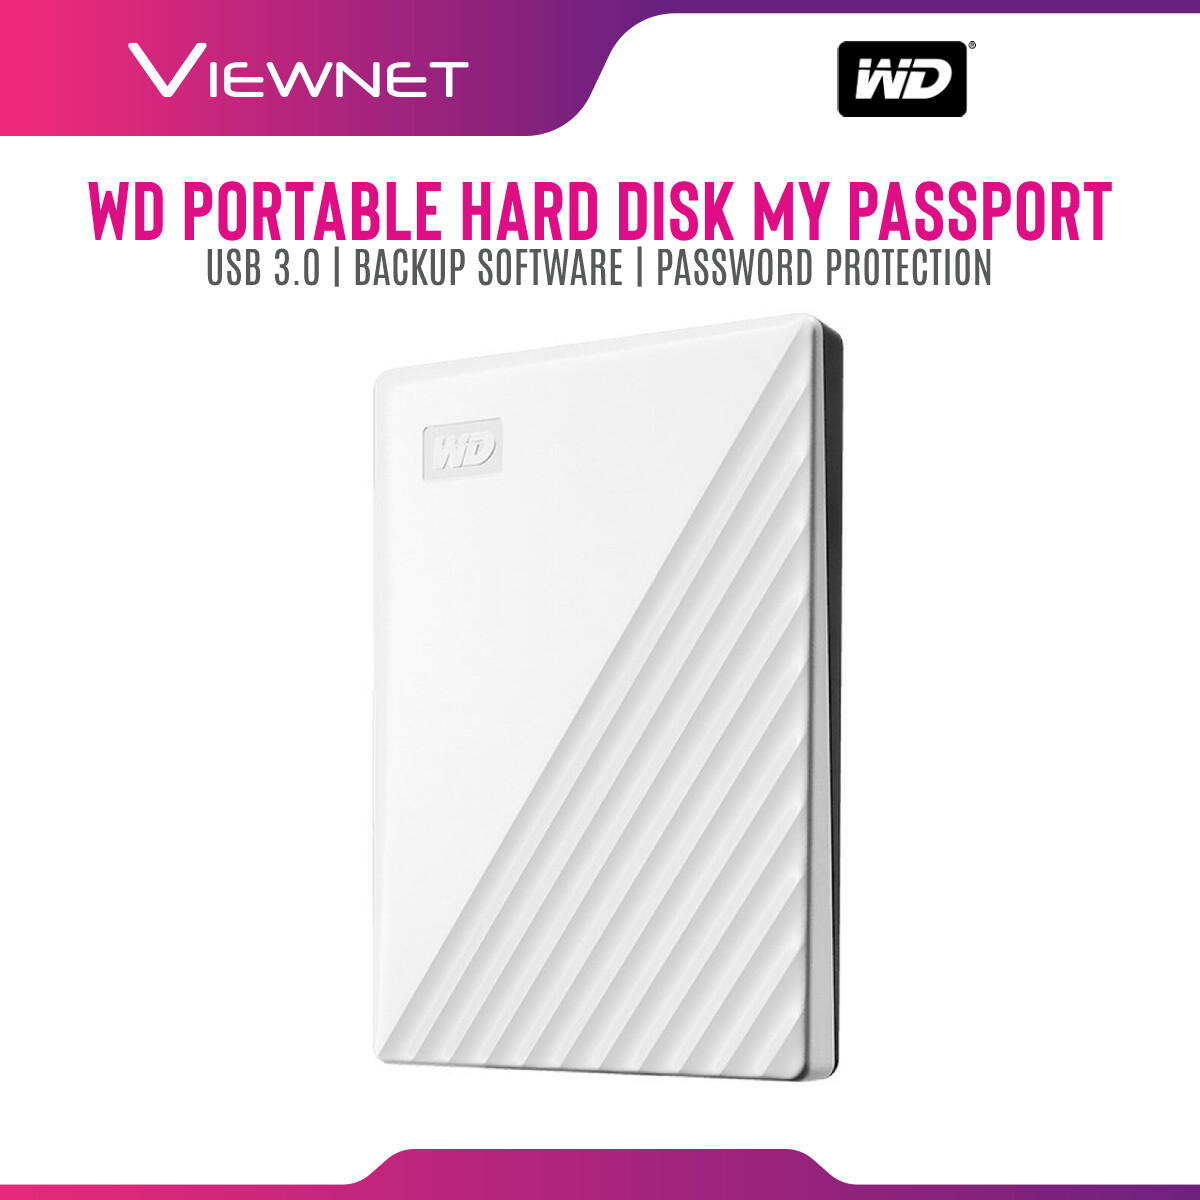 WD Western Digital My Passport  5TB ( WHITE ) Slim Portable External Hard Disk USB 3.0 With WD Backup Software & Password Protection